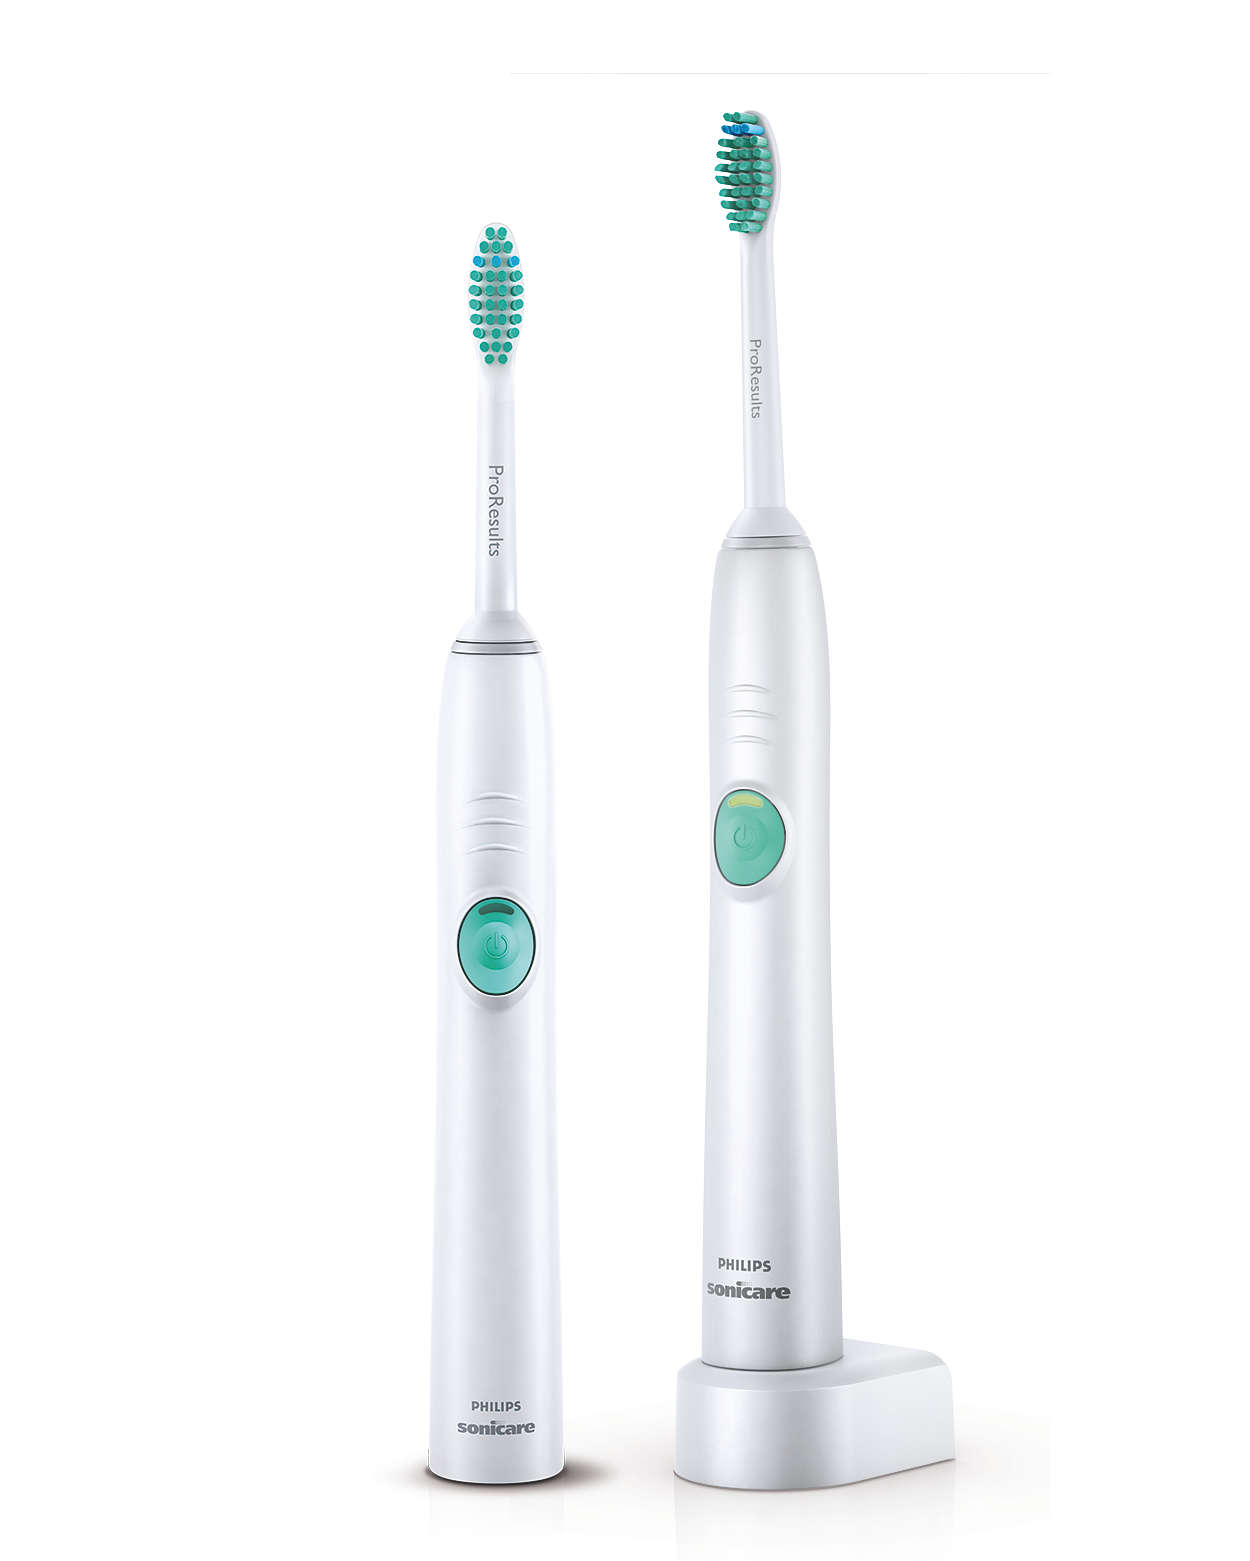 efficiently Dalset cricket EasyClean Sonic electric toothbrush HX6512/02 | Sonicare